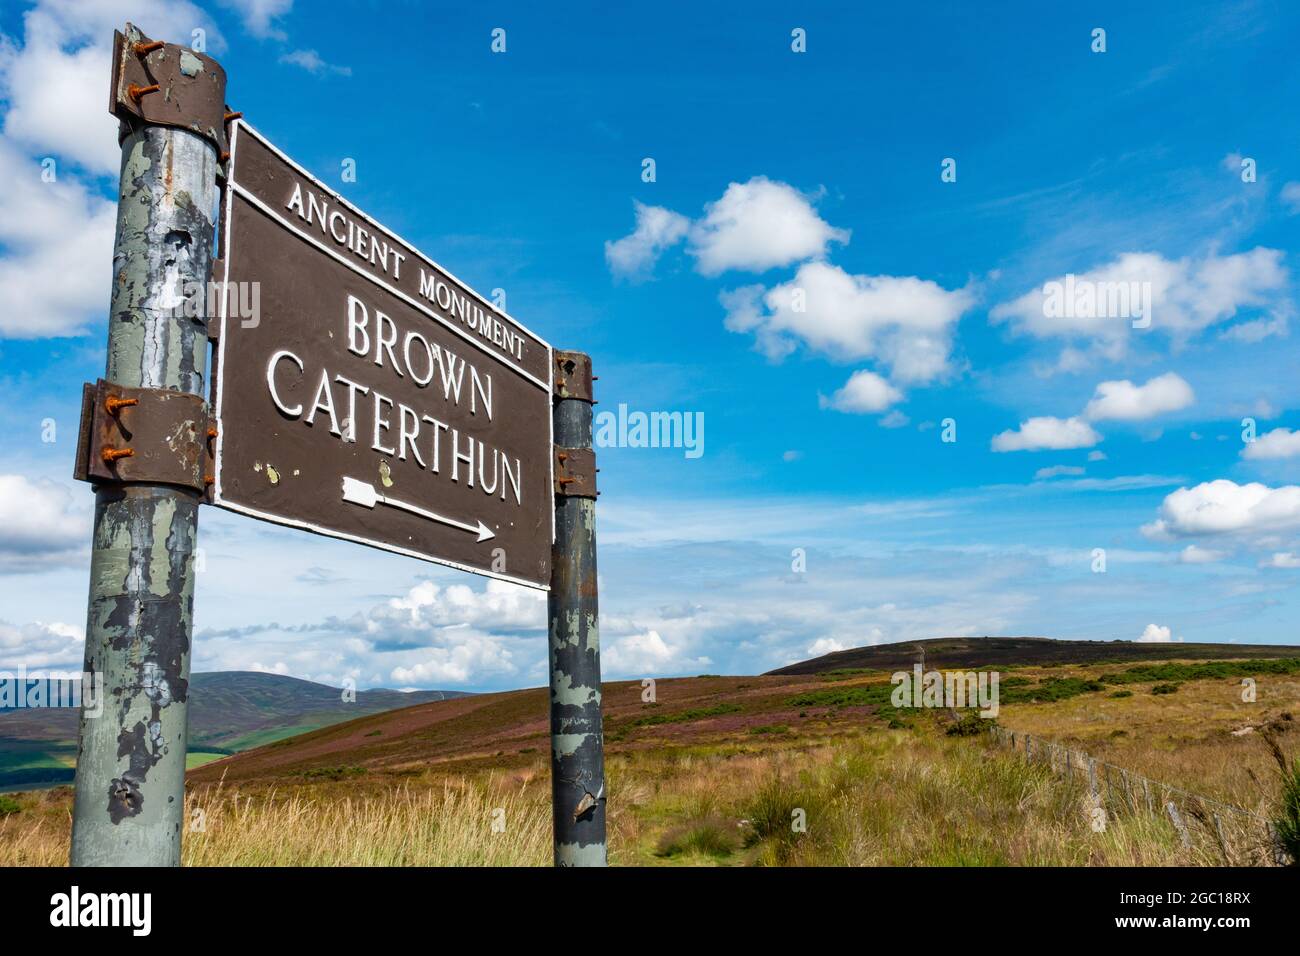 signpost marking the path to the Iron Age hill fort known as the Brown Caterthun near Brechin, Angus, Scotland Stock Photo